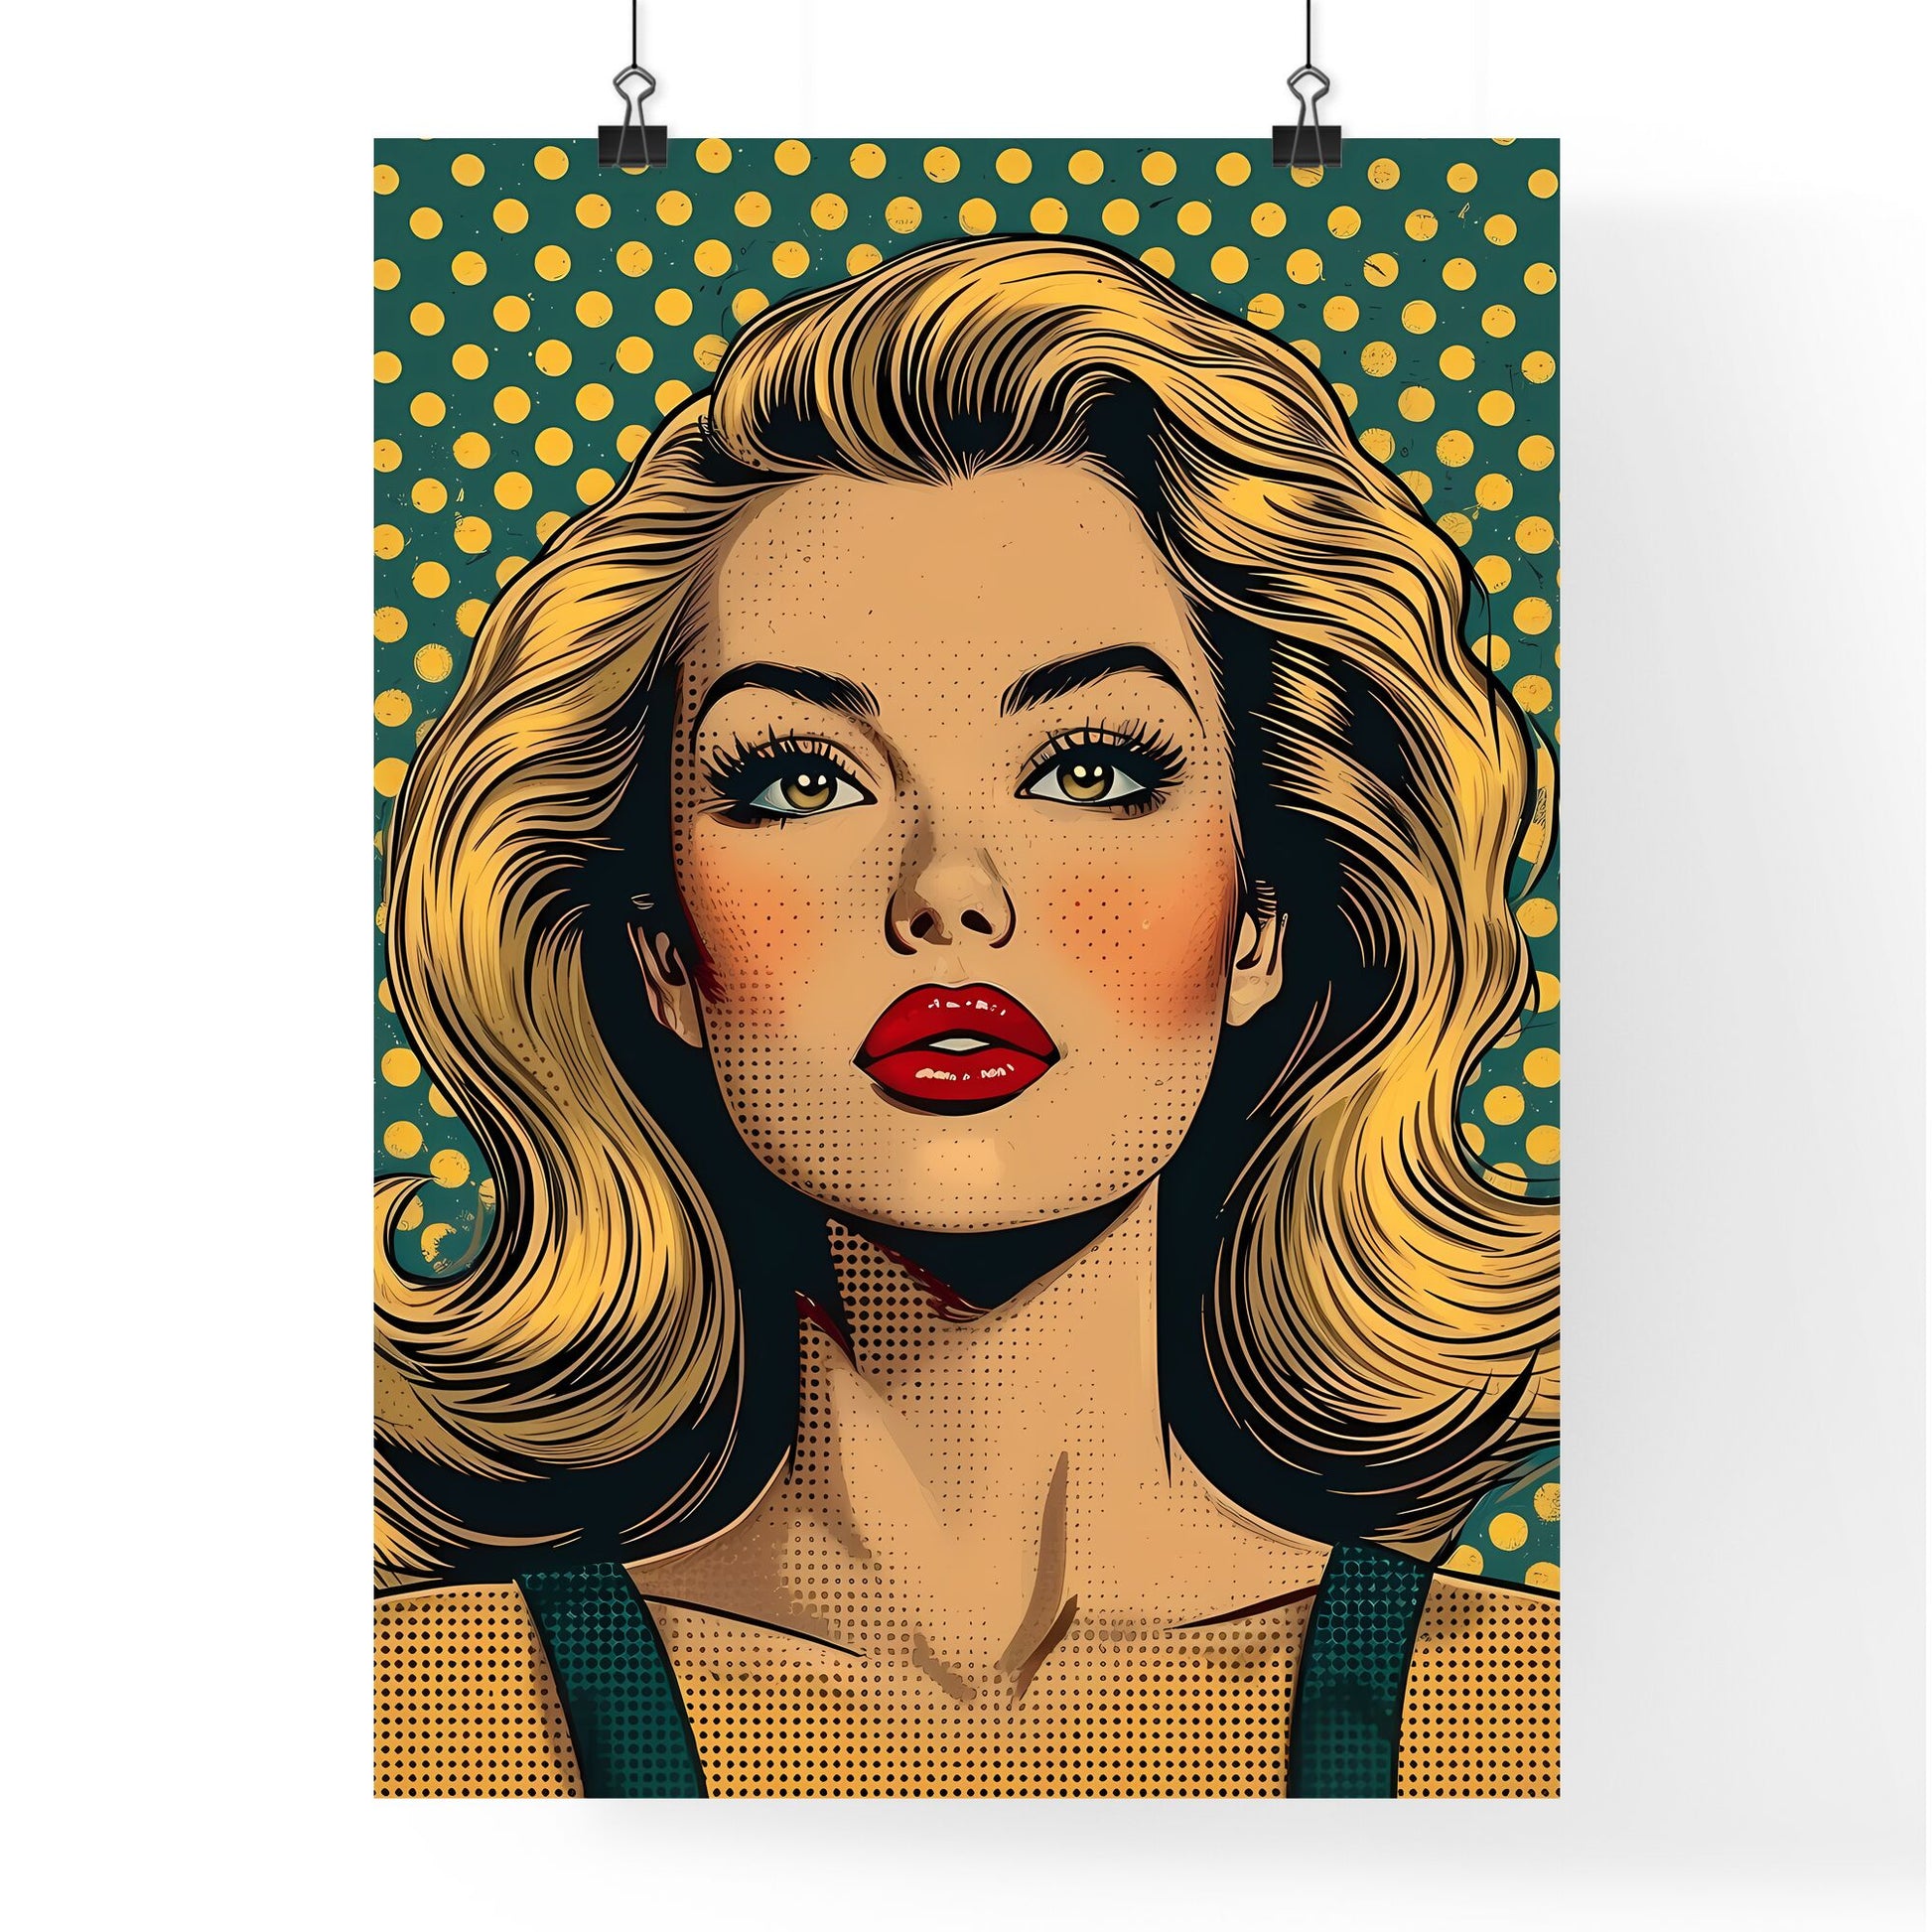 Vectorial illustration of vintage flames - Art print of a woman with blonde hair and red lips Default Title